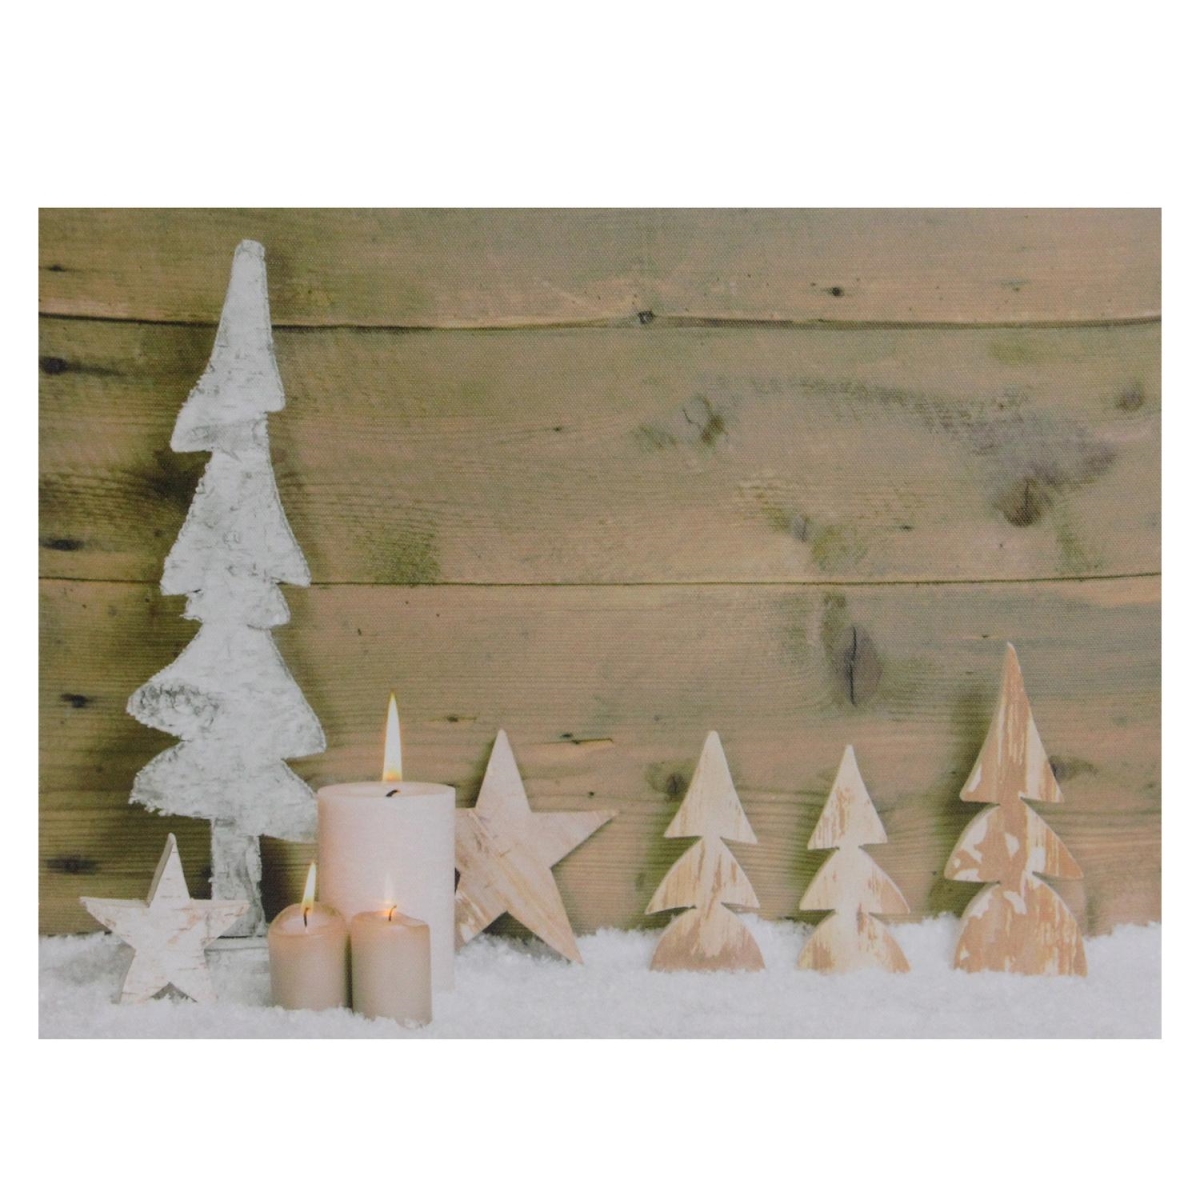 32621273 Lighted Candles & Wooden Trees Canvas Wall Art